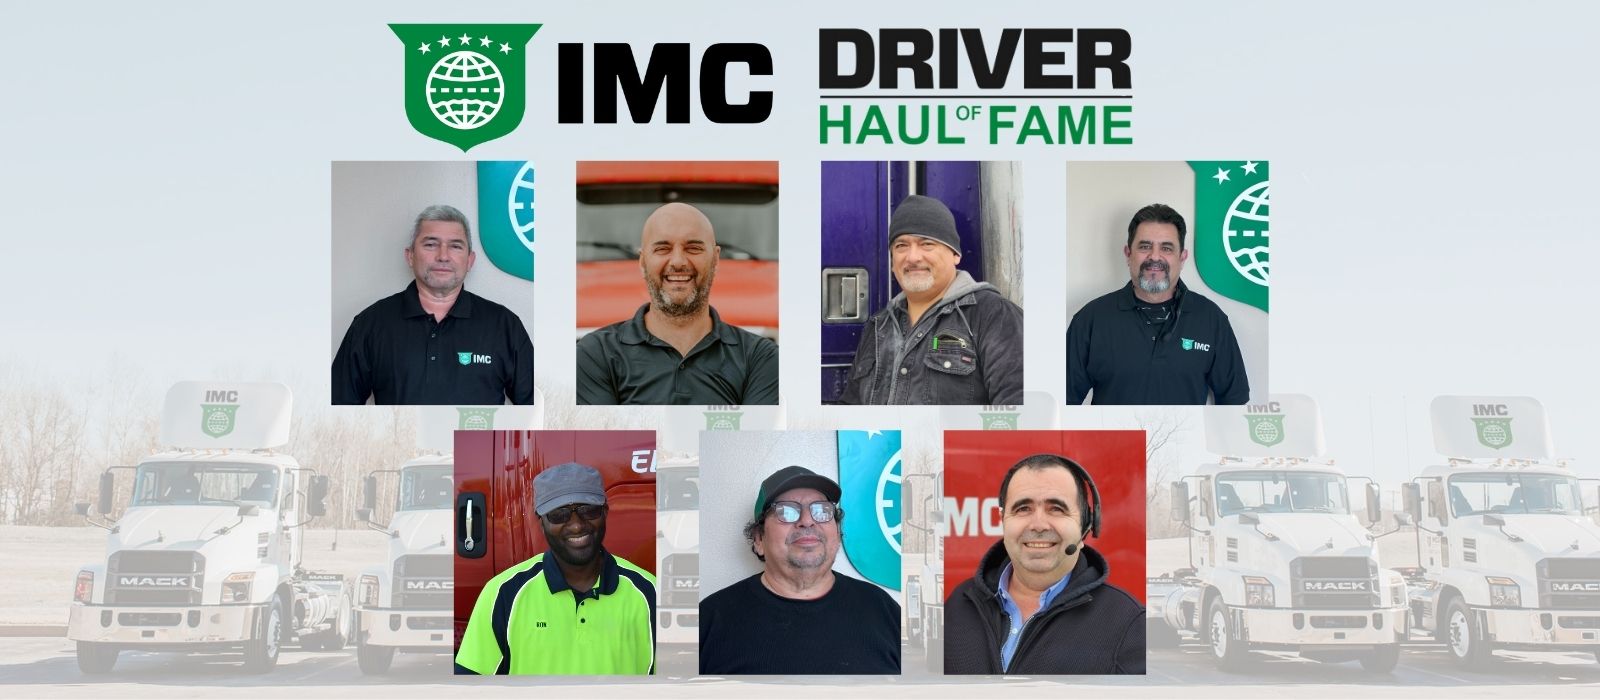 IMC Inducts Seven 20 Year Tenured Drivers into the ‘Haul of Fame’